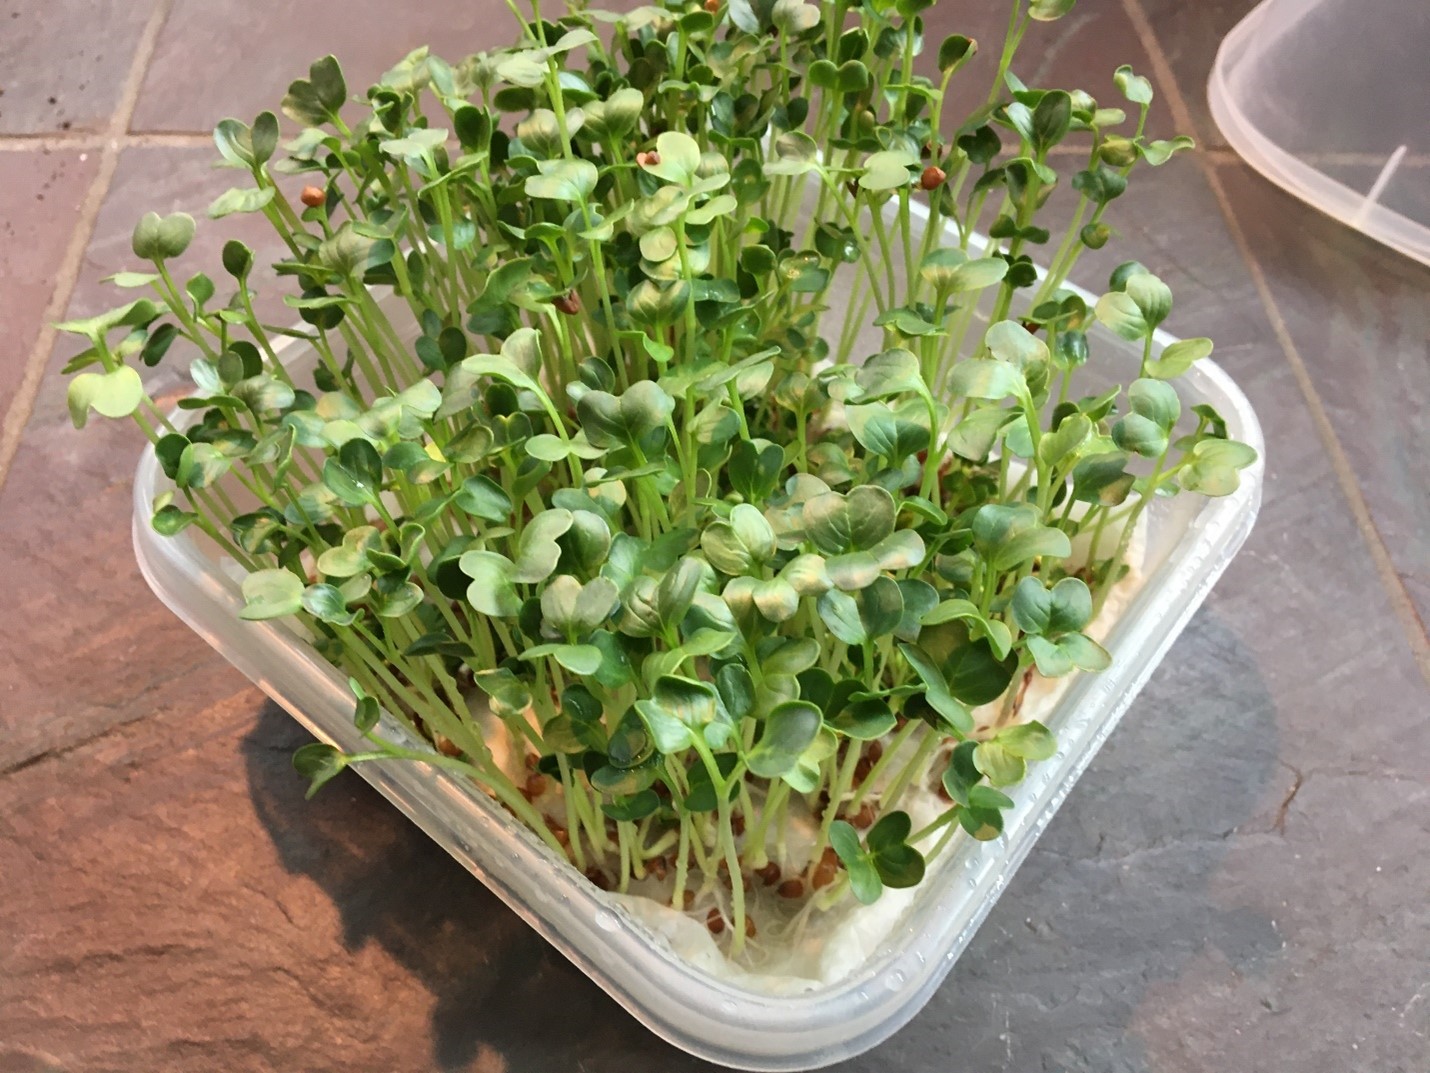 Some home-grown microgreens in a food-grade plastic container lined with paper towels.